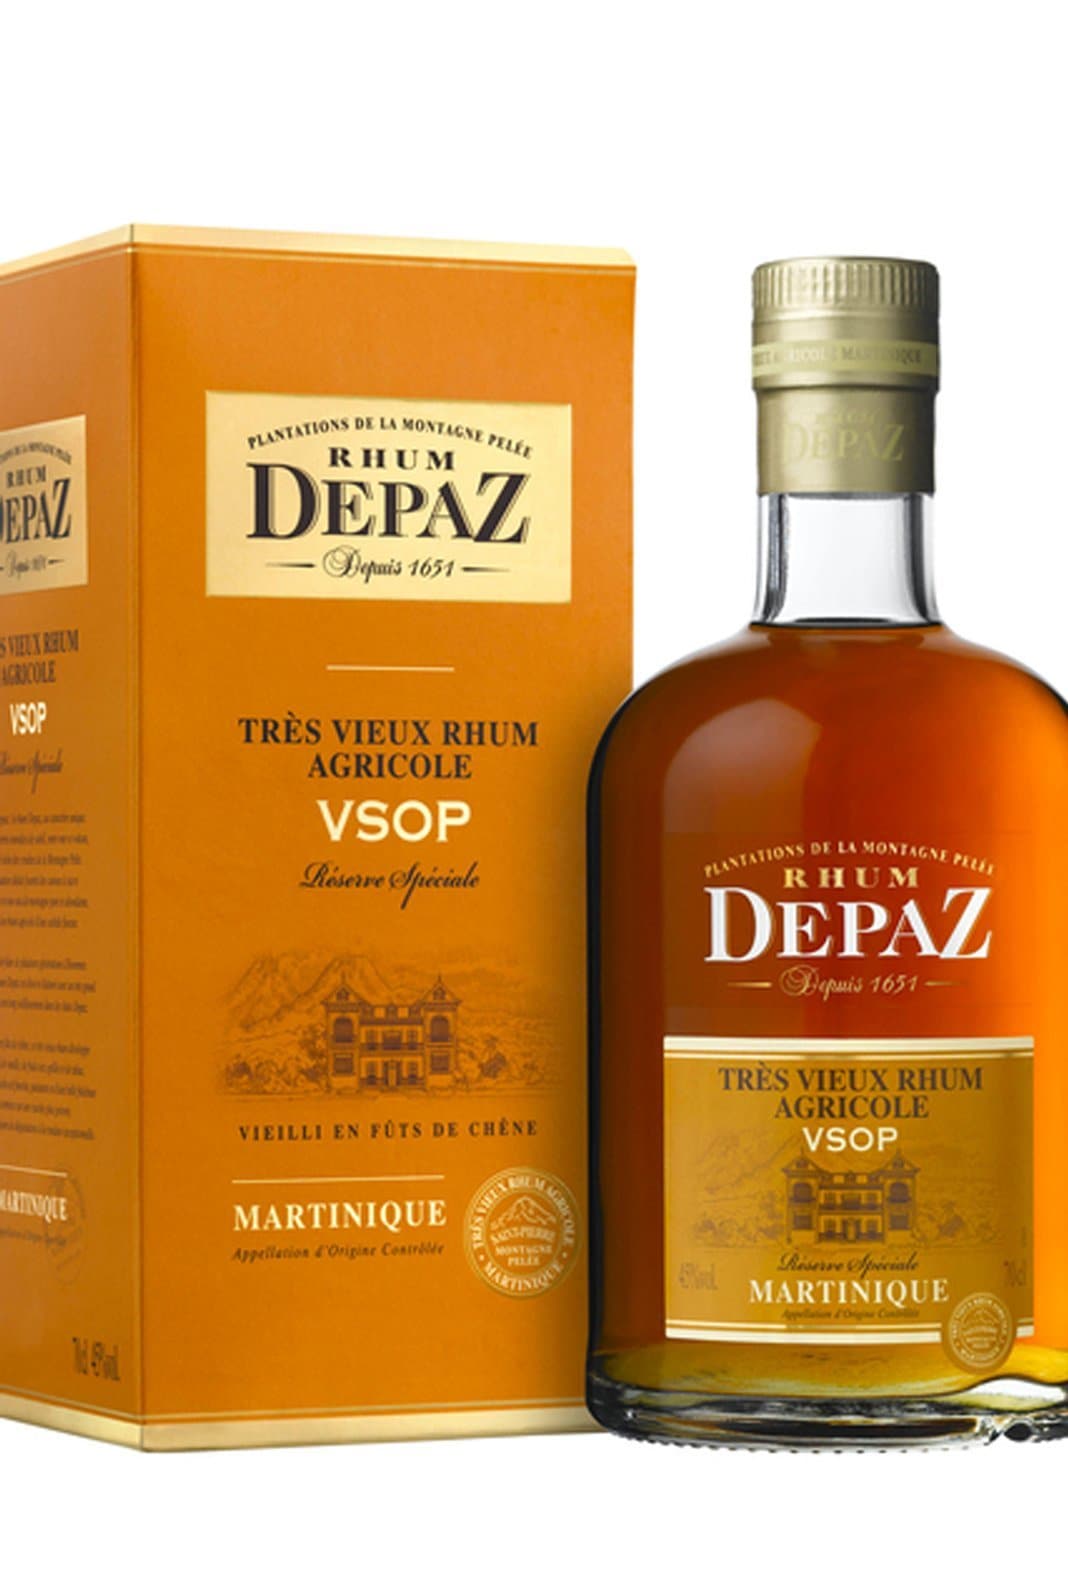 Depaz Rum Agricole Reserve Speciale VSOP Martinique 7 years 45% 700ml | Rum | Shop online at Spirits of France